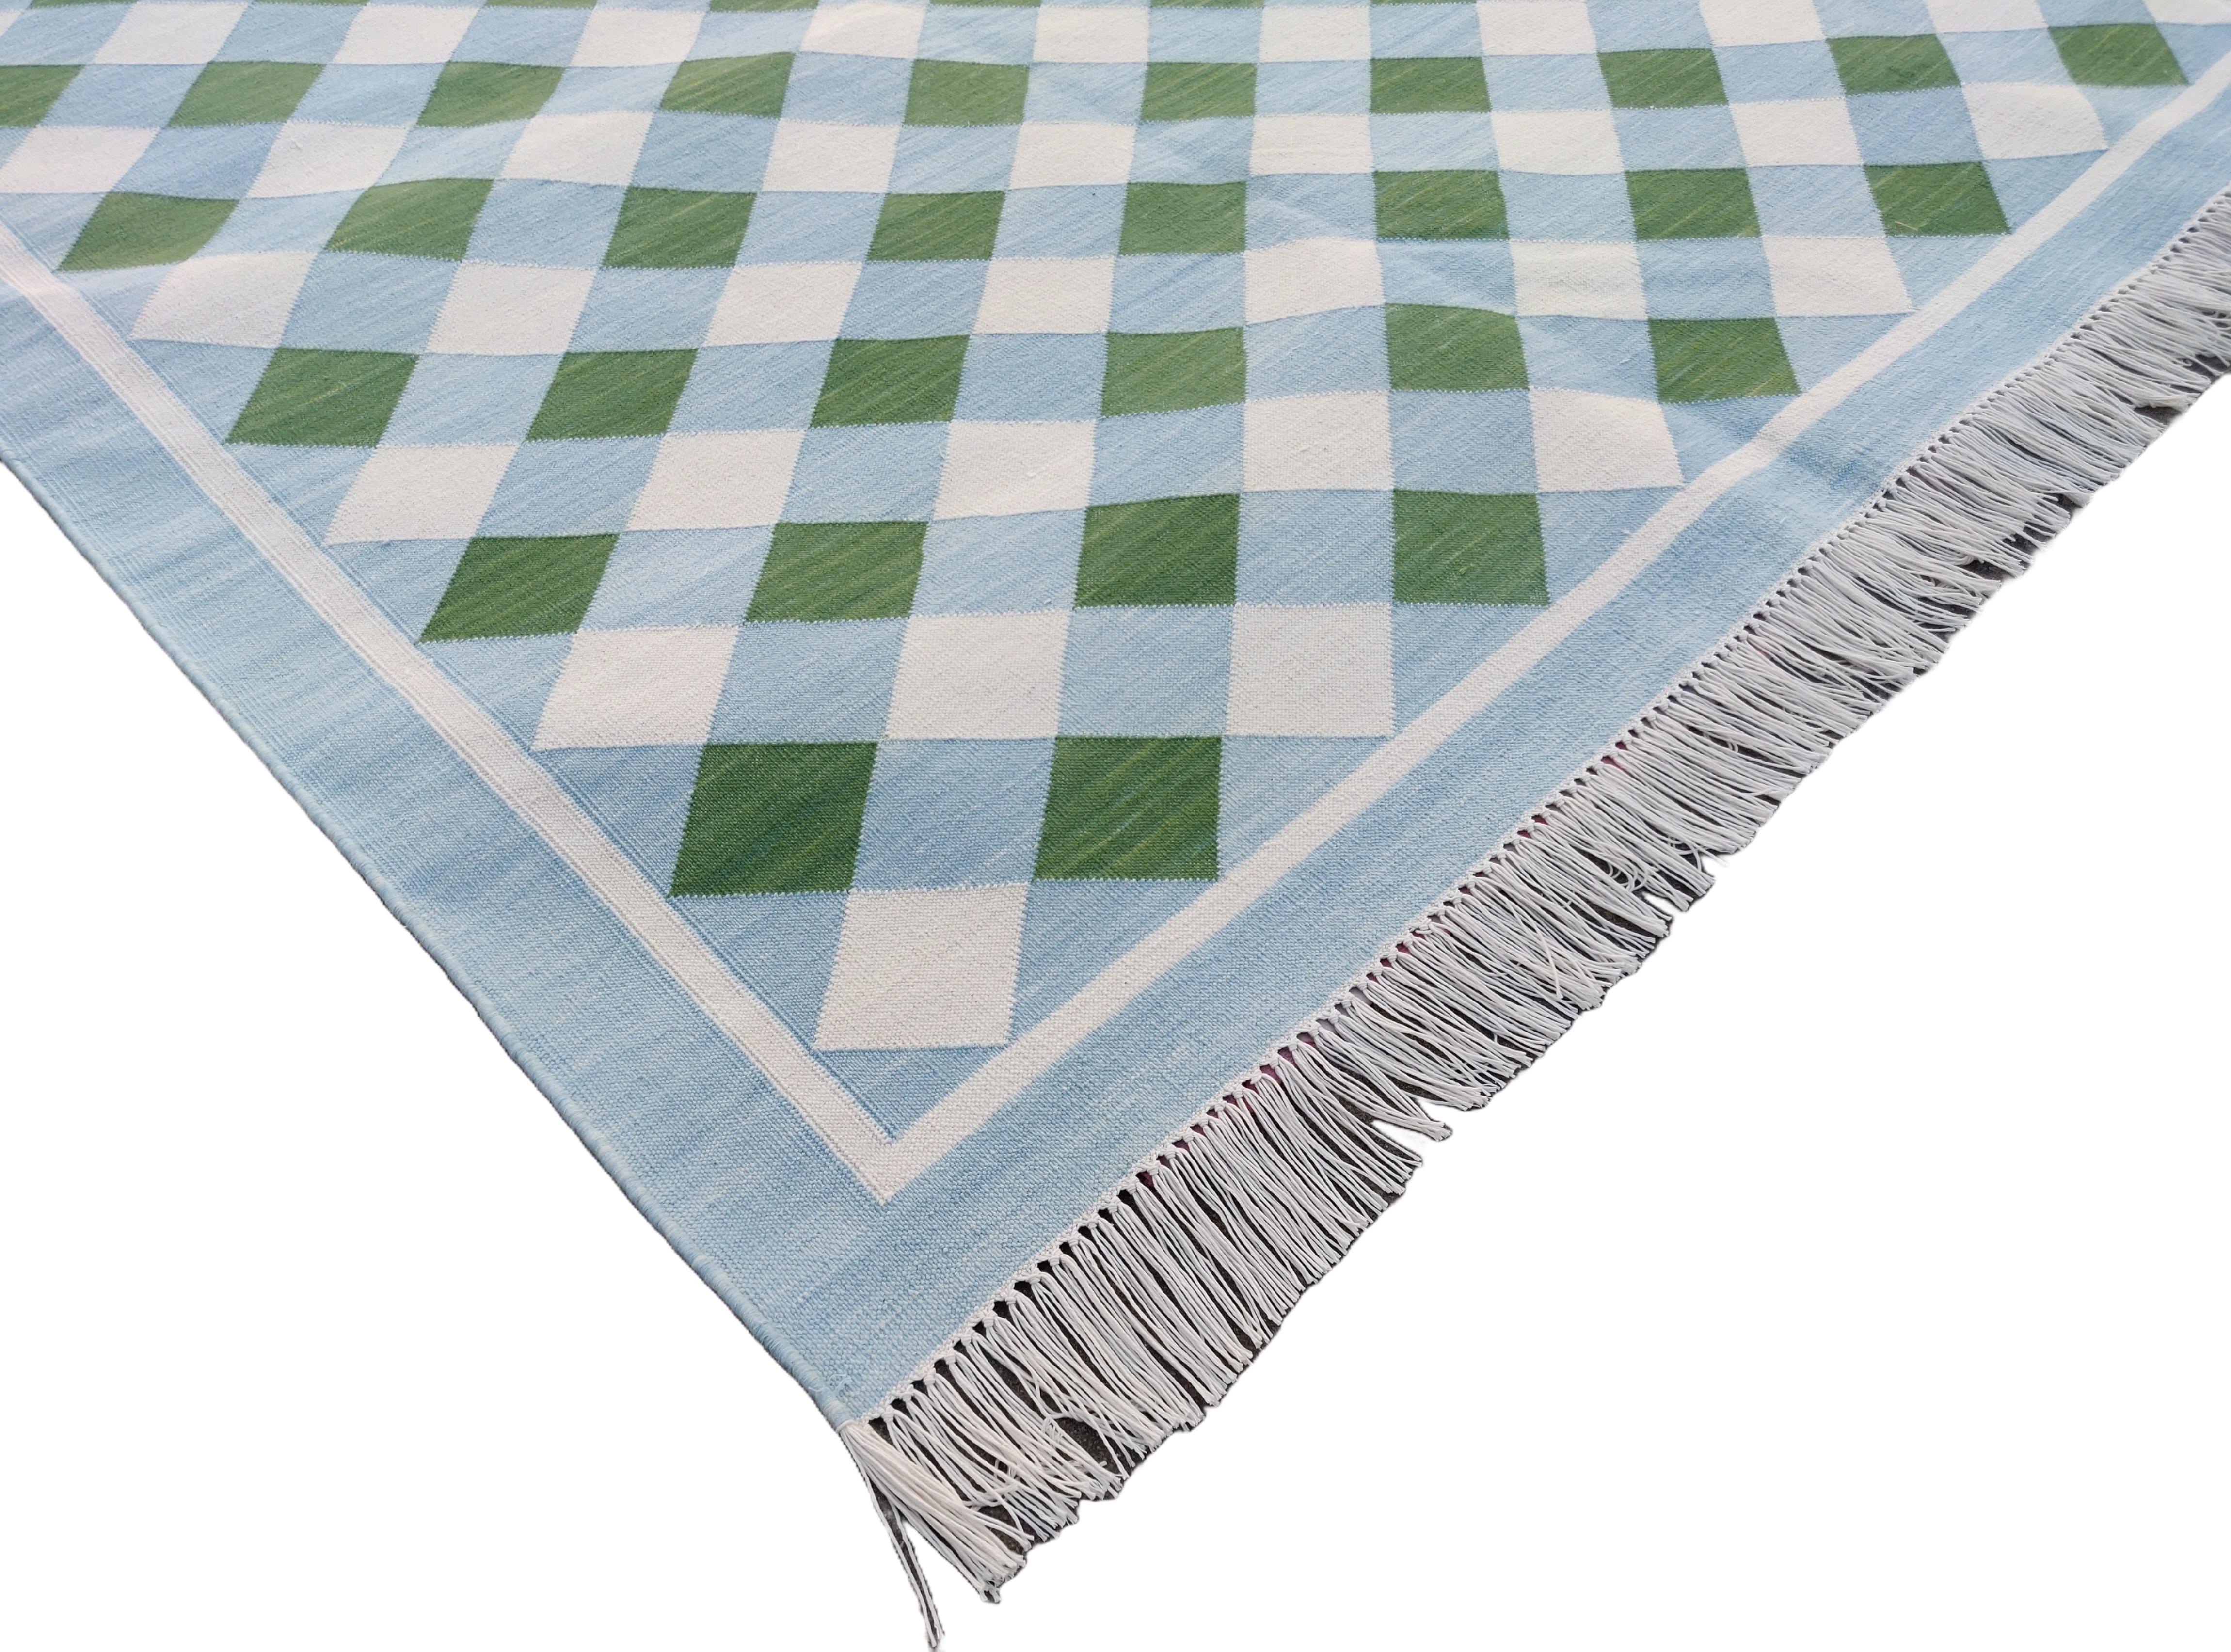 Cotton Vegetable Dyed Area Rug, Sky Blue, Cream And Green Checked Indian Rug-9'x12'
These special flat-weave dhurries are hand-woven with 15 ply 100% cotton yarn. Due to the special manufacturing techniques used to create our rugs, the size and